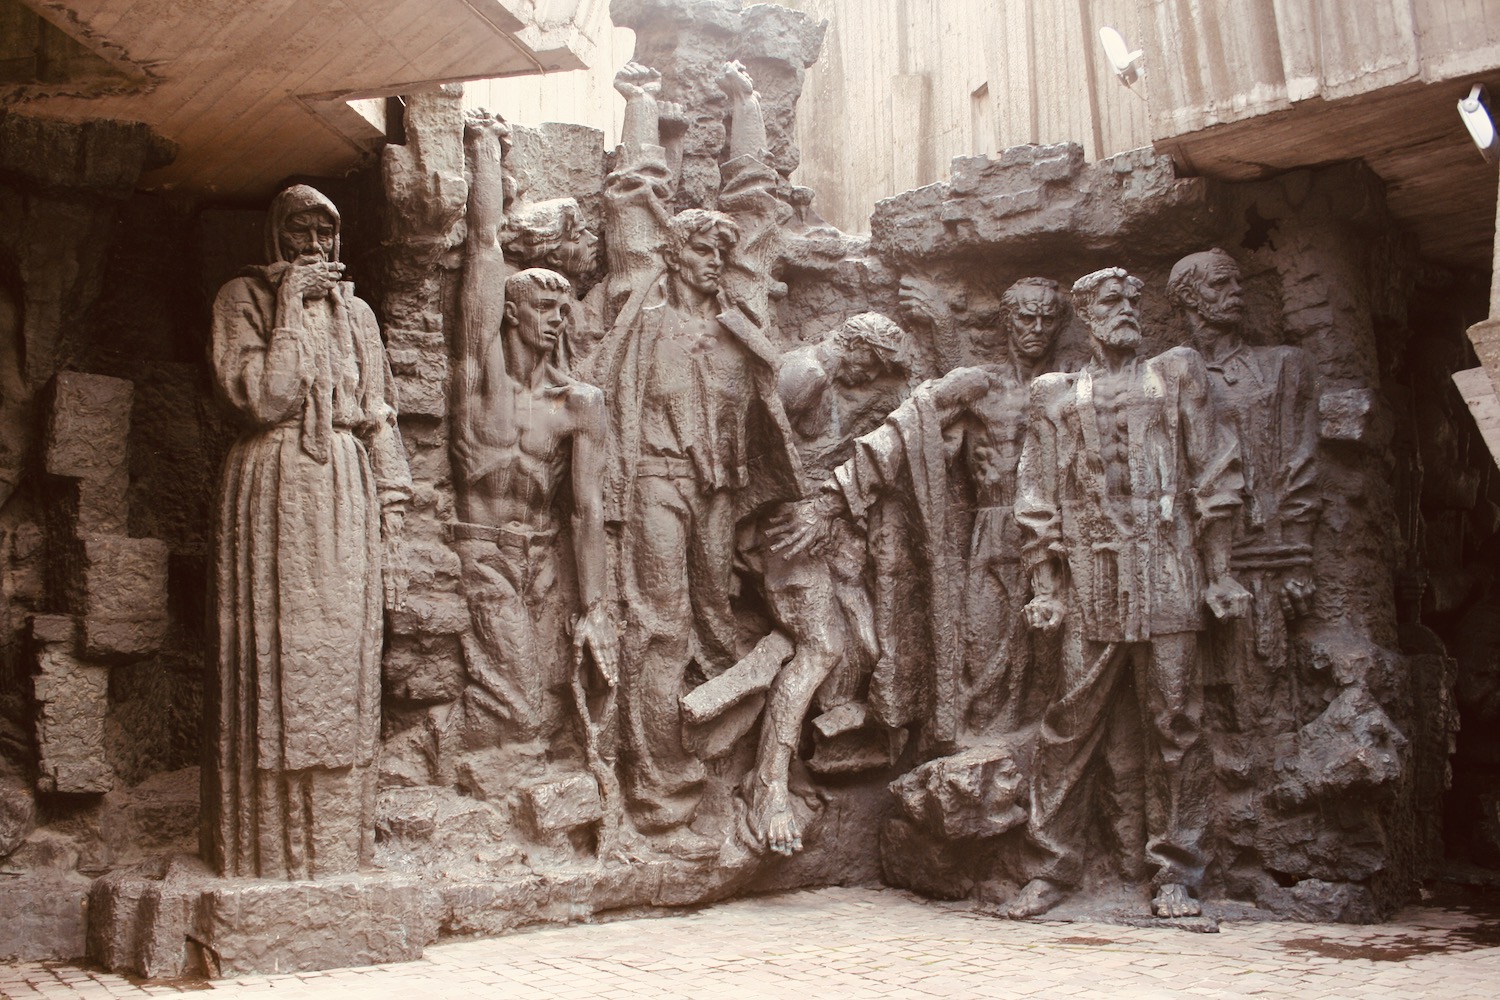 a stone sculpture of people in a row